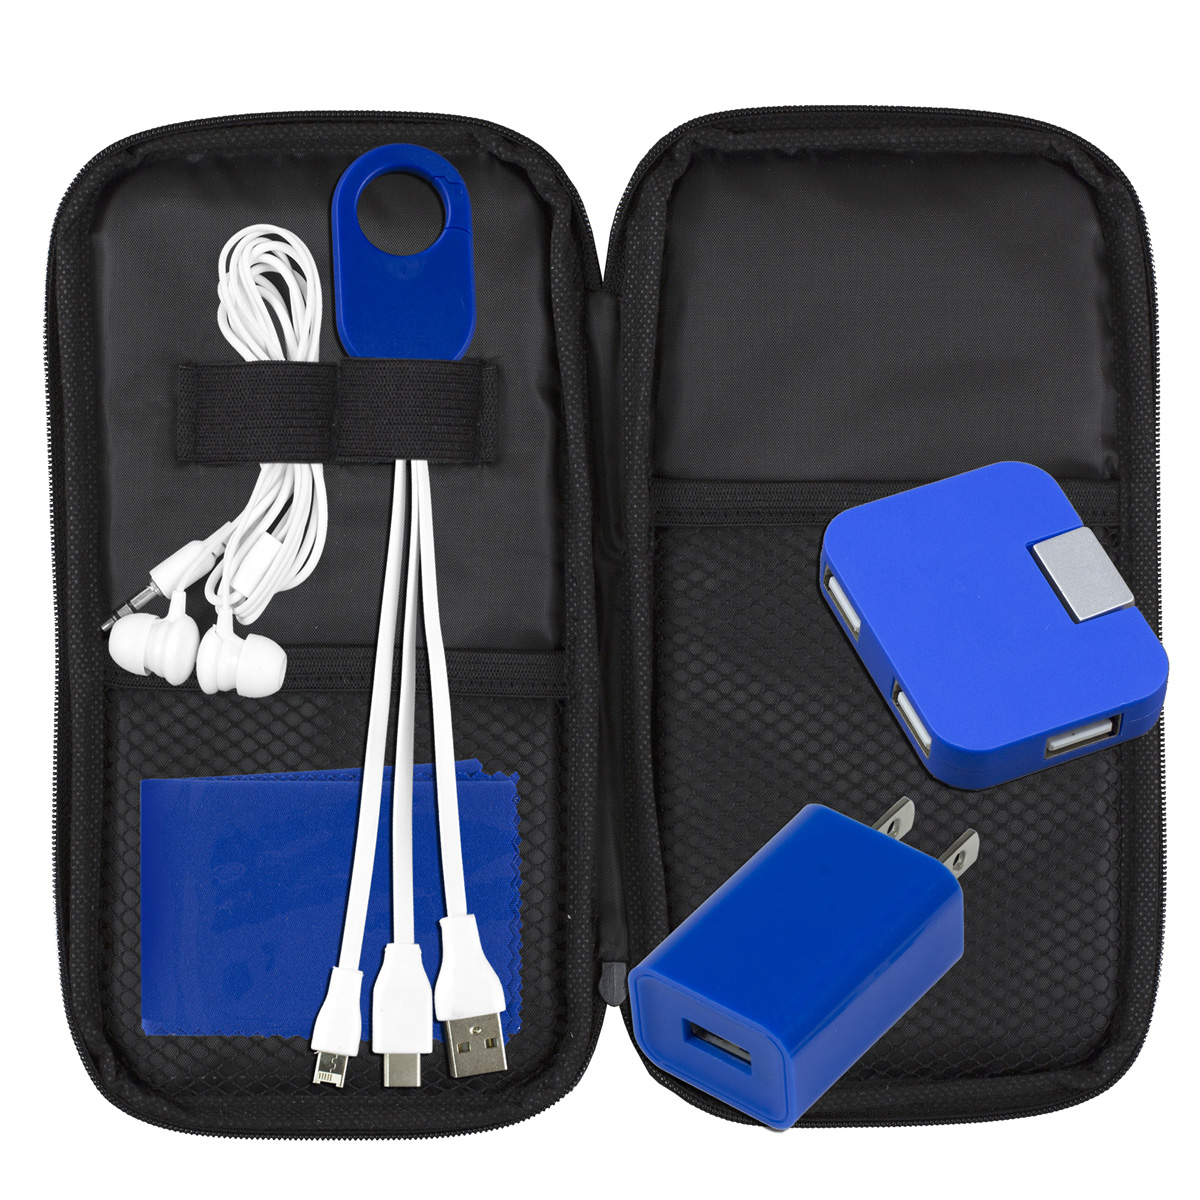 Deluxe Cell Phone Charging and Accessory Travel Kit